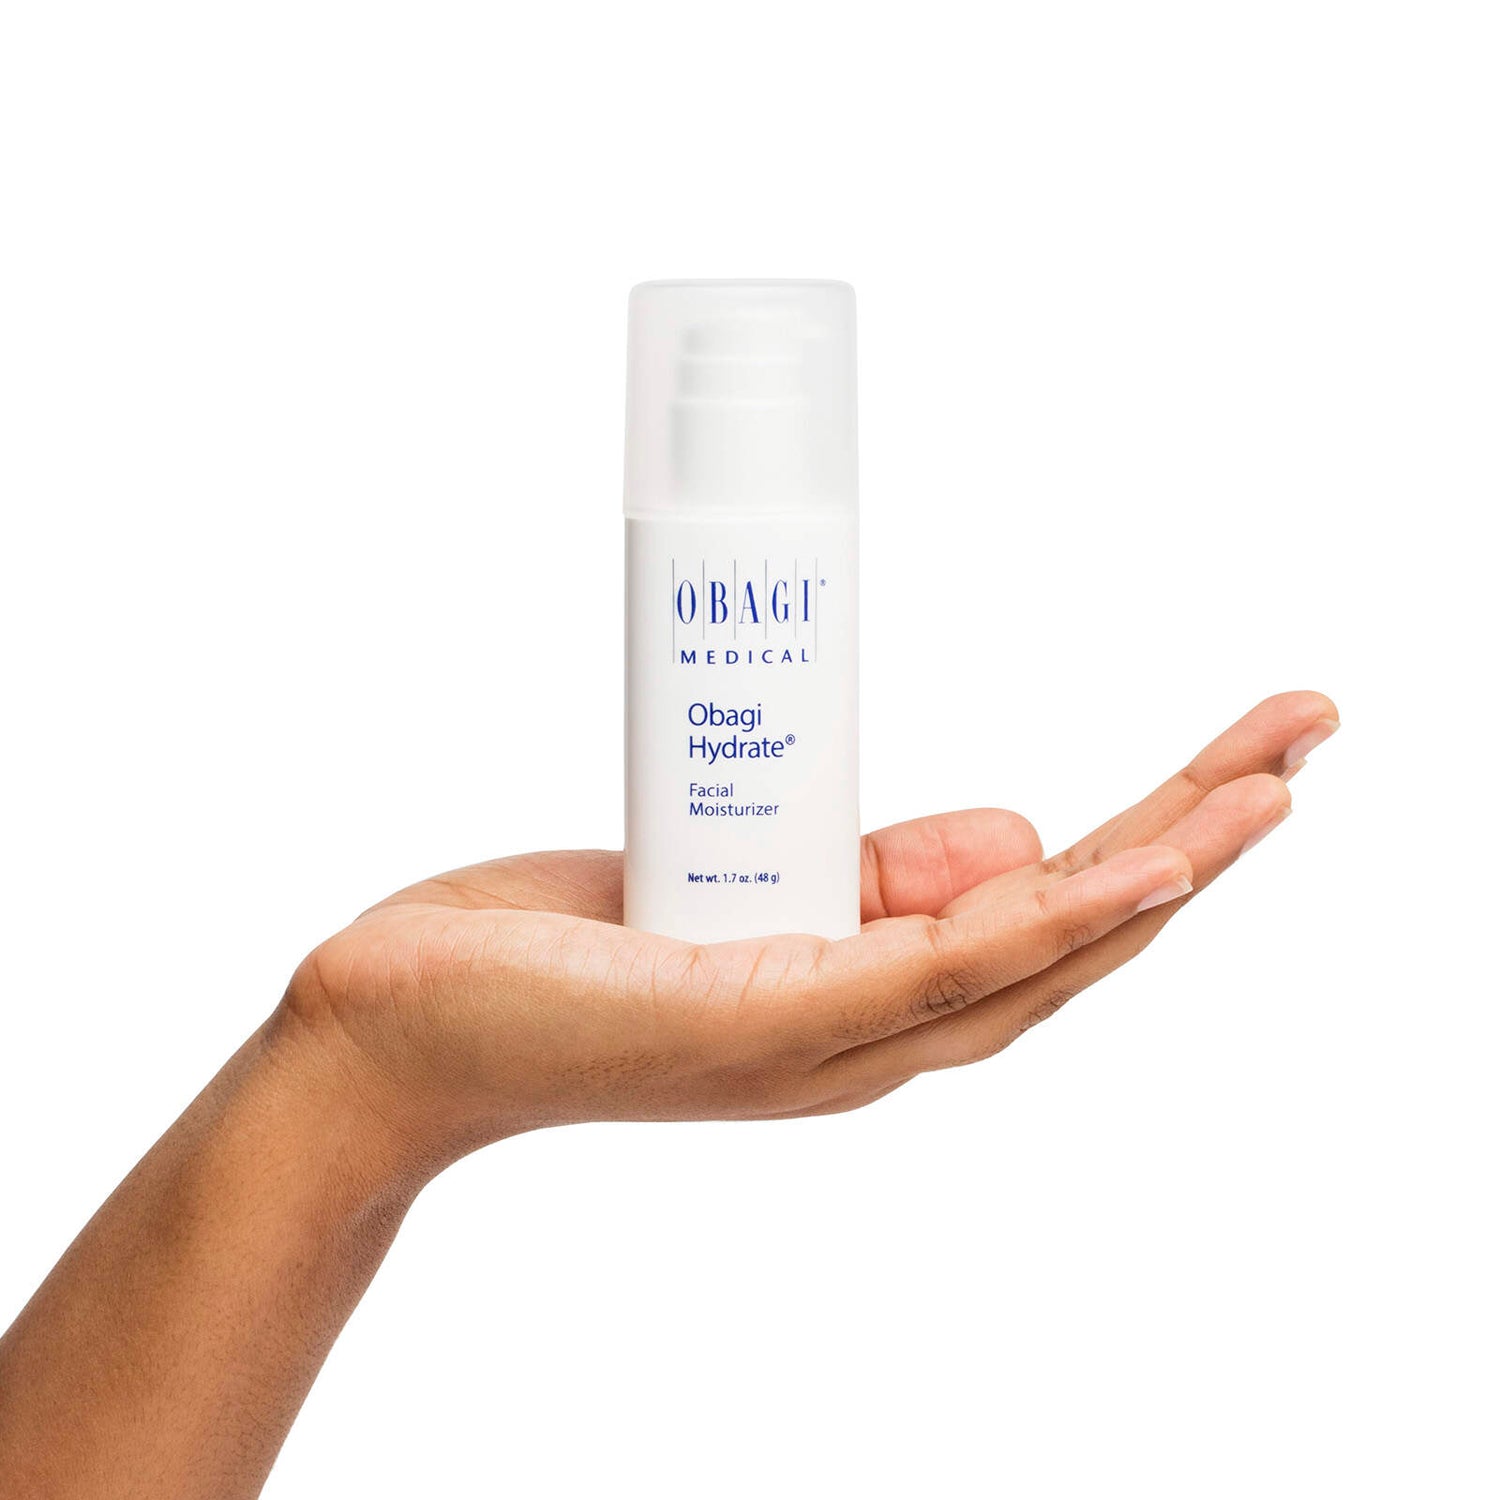 Obagi Hydrate Facial Moisturizer from MyExceptionalSkinCare.com Hand